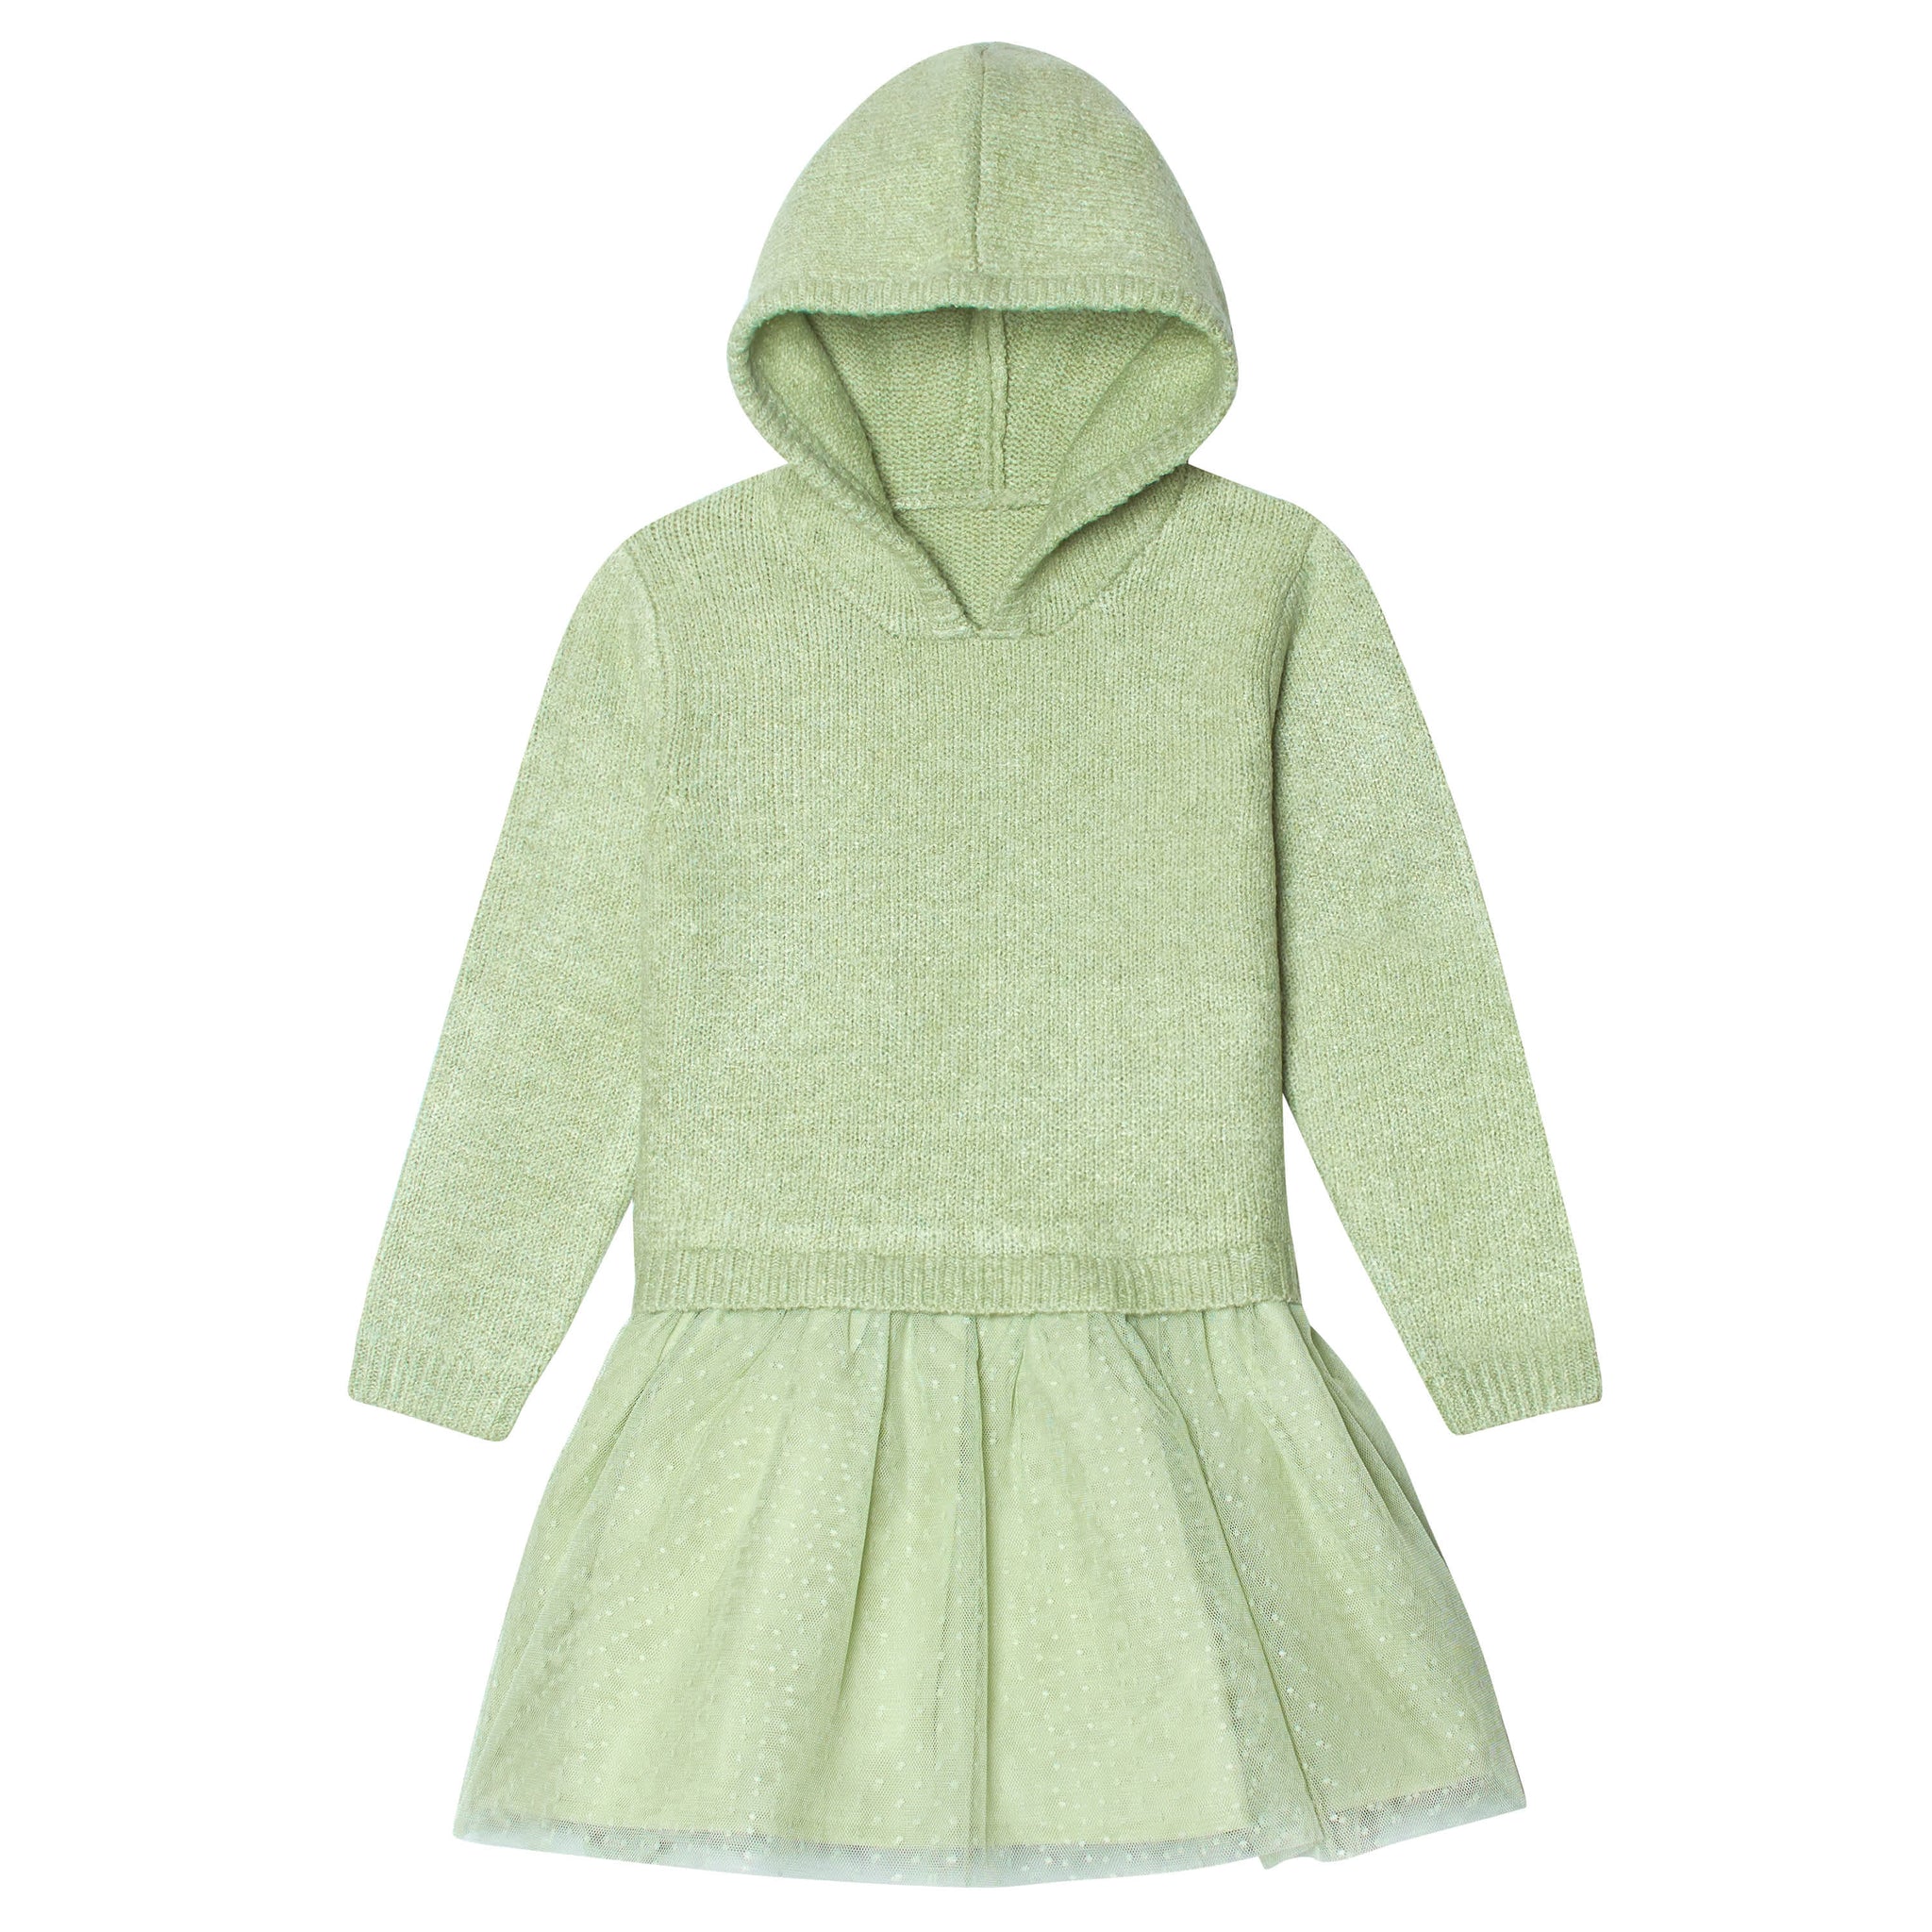 Infant & Toddler Girls Green Sweater Dress With Tulle Skirt-Gerber Childrenswear Wholesale